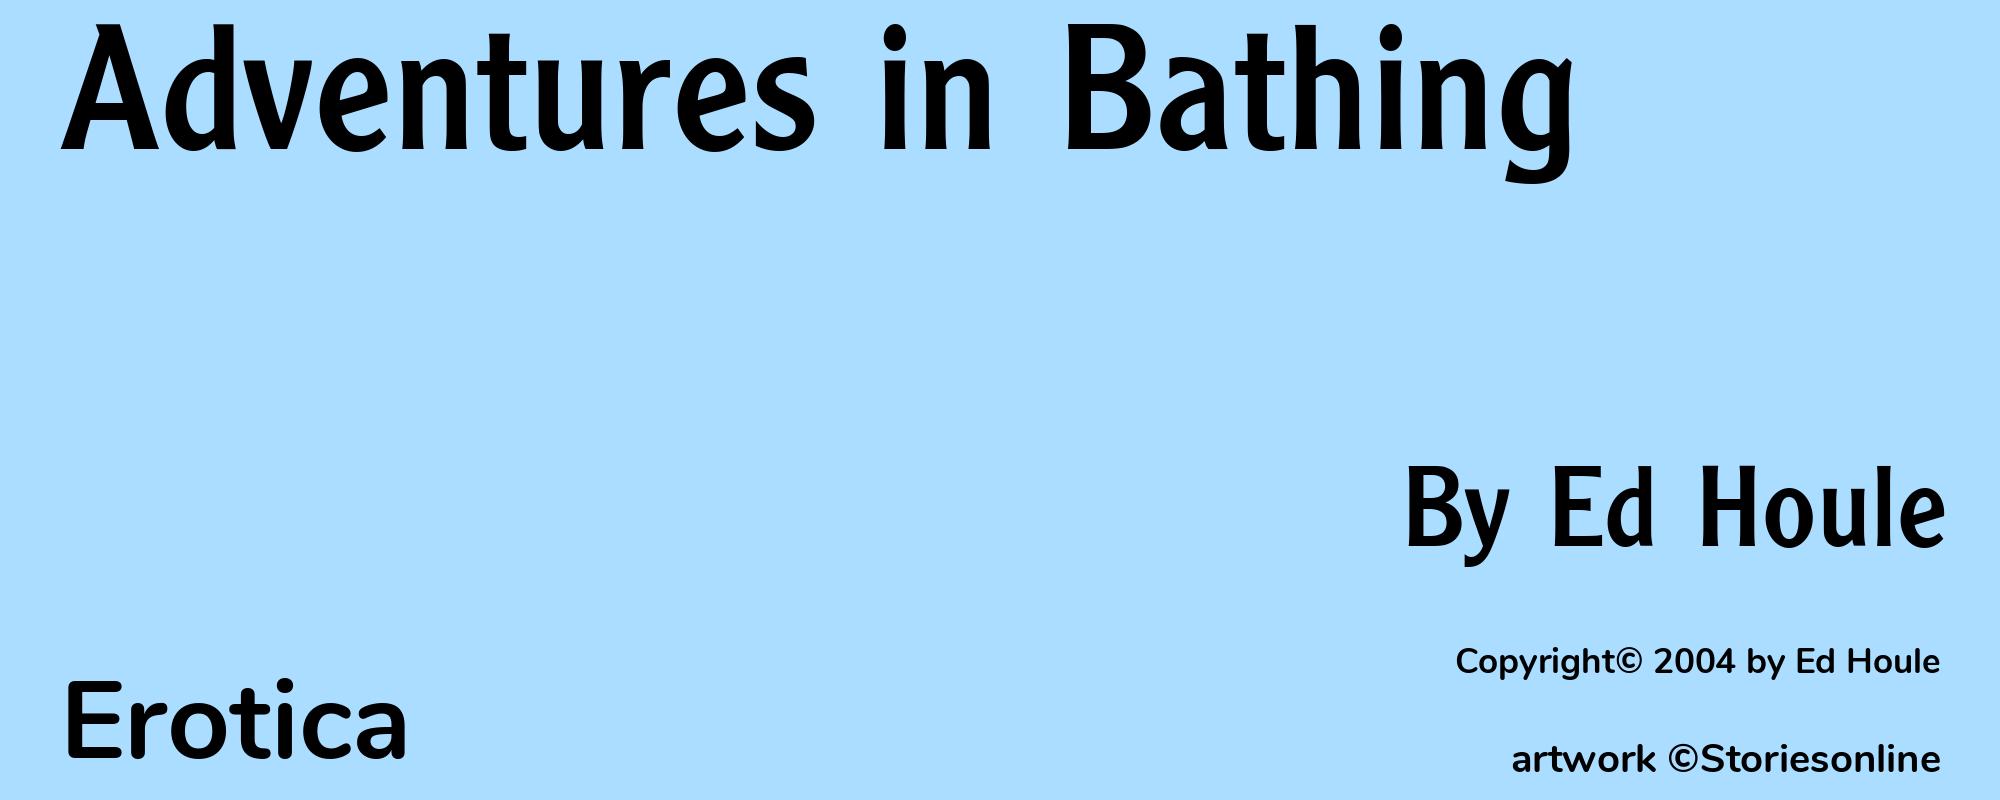 Adventures in Bathing - Cover